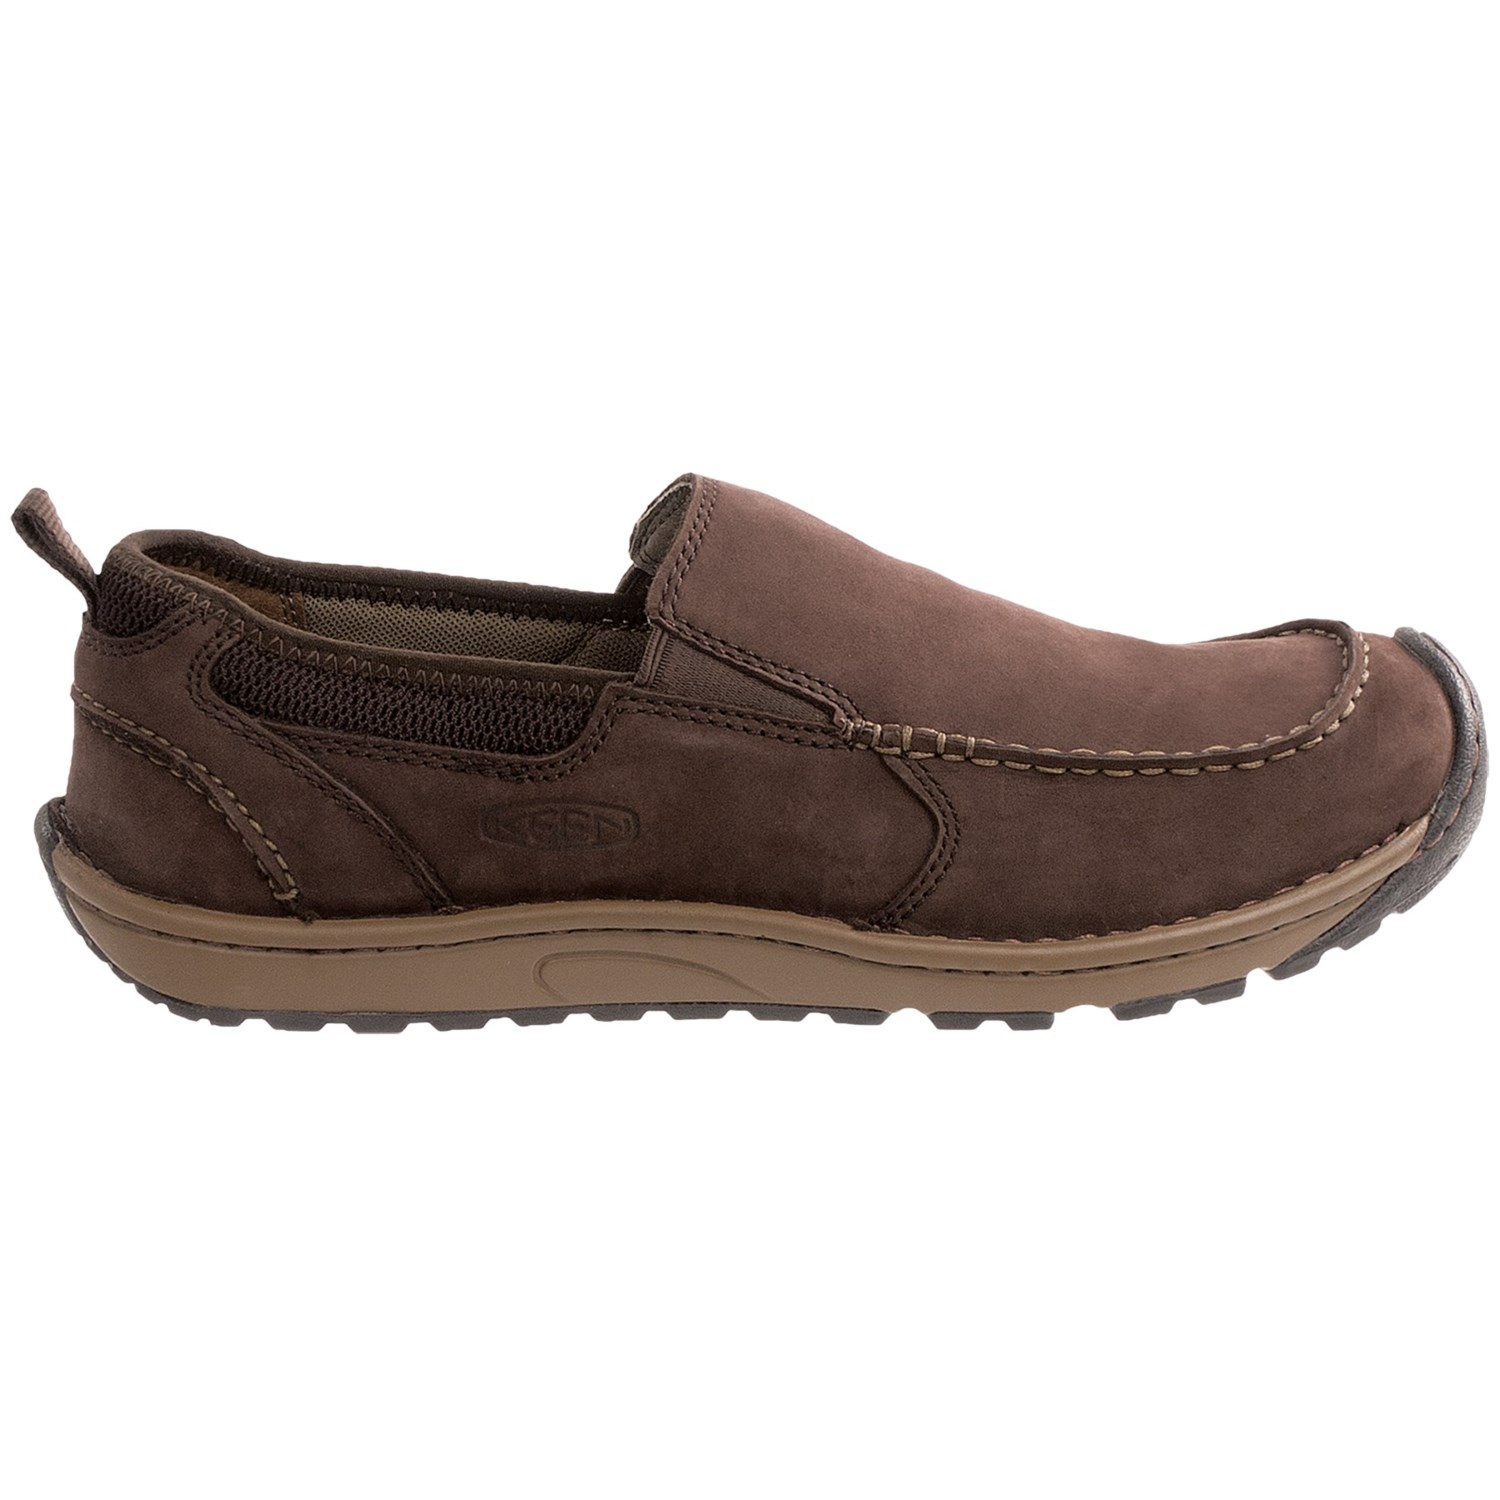 Keen Dillon II Slip-On Shoes (For Men) 7214D - Save 30%